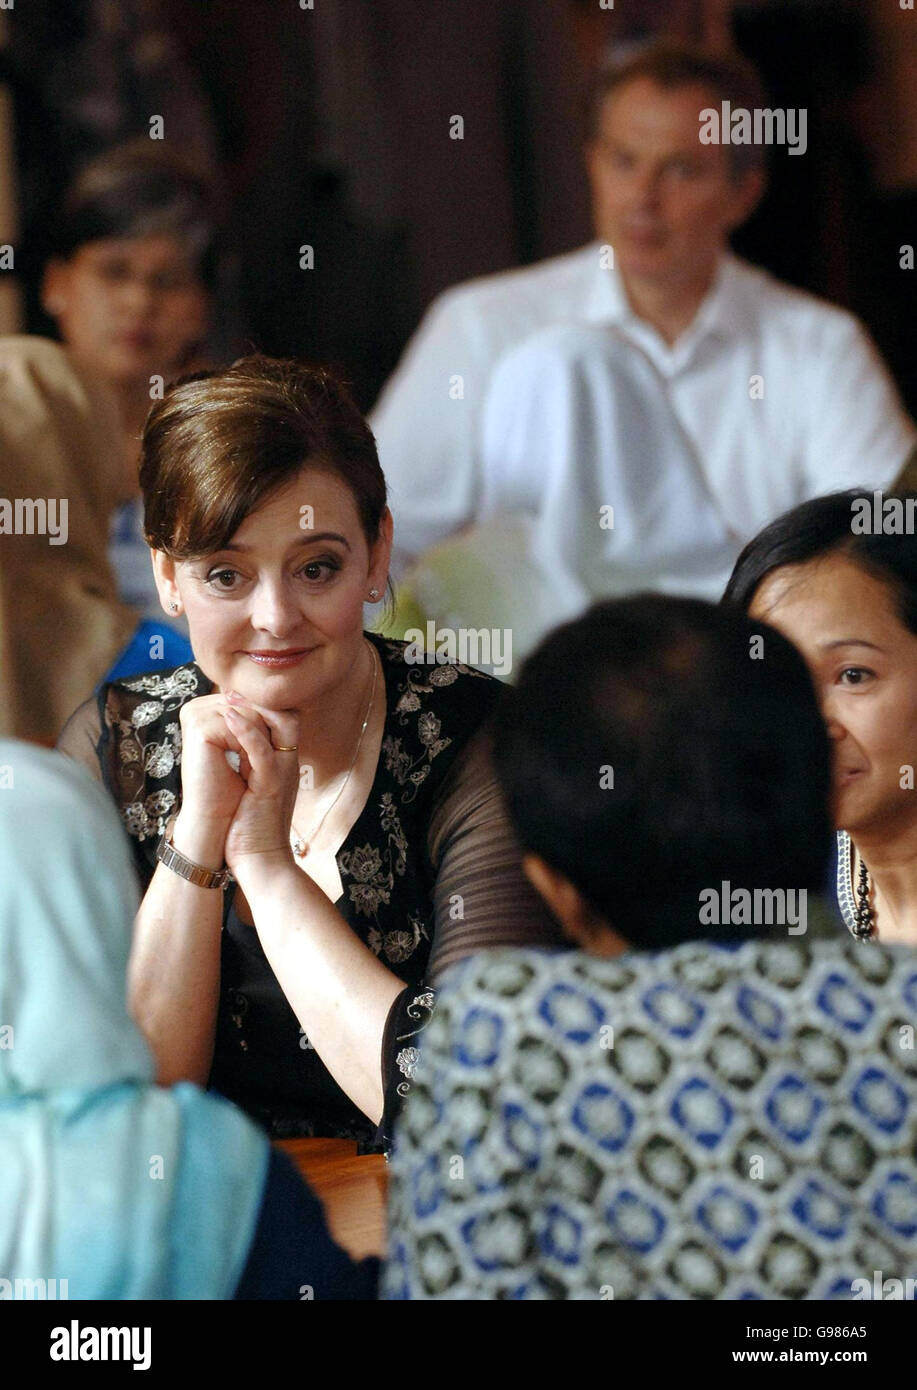 Britain's Prime Minister Tony Blair and wife Cherie meet widows of the tsunami disaster and the civil war in Aceh province, Indonesia, Thursday March 30, 2006. Mr Blair today pledged to work more closely with the world's largest Muslim country in the fight against terrorism but Indonesian Muslim leaders told him his policies were breeding extremism. Mr Blair, accompanied by his wife Cherie, touched down in the capital Jakarta last night on the last leg of a marathon seven-day diplomatic mission. See PA story POLITICS Blair. PRESS ASSOCIATION photo. Photo credit should read: Stefan Rousseau/PA. Stock Photo